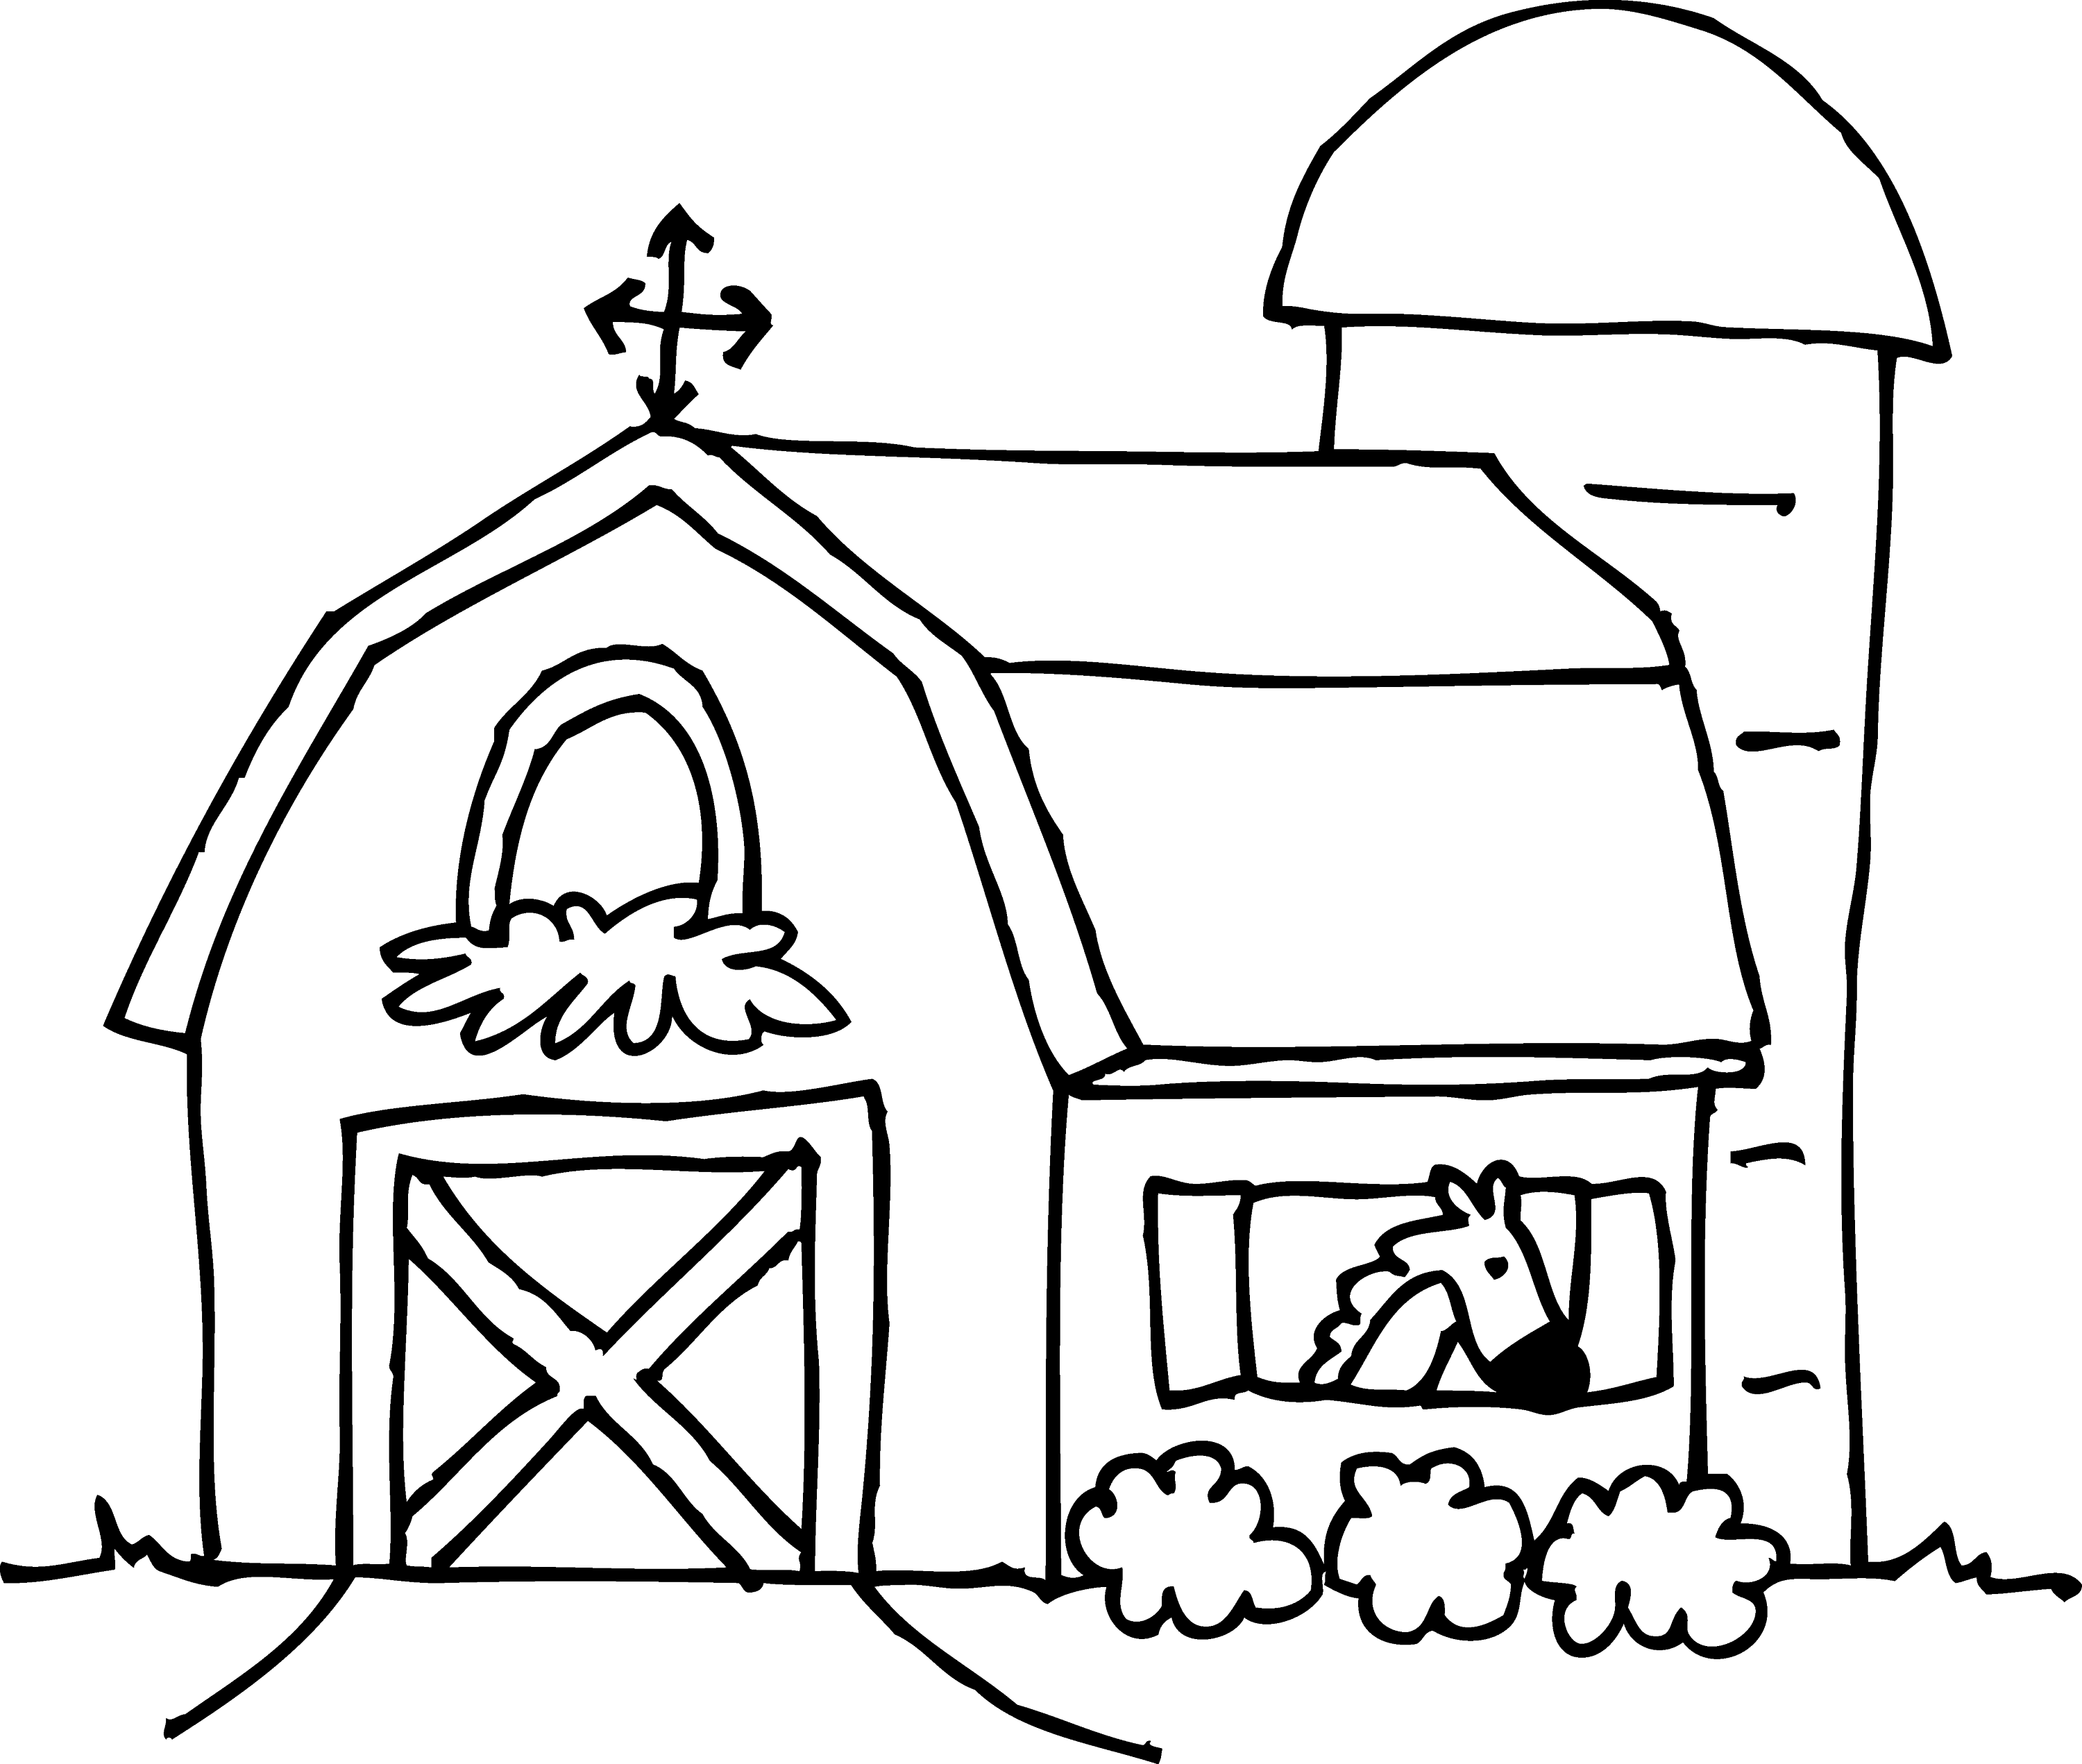 Cute Barn Coloring Page Free Clip Art